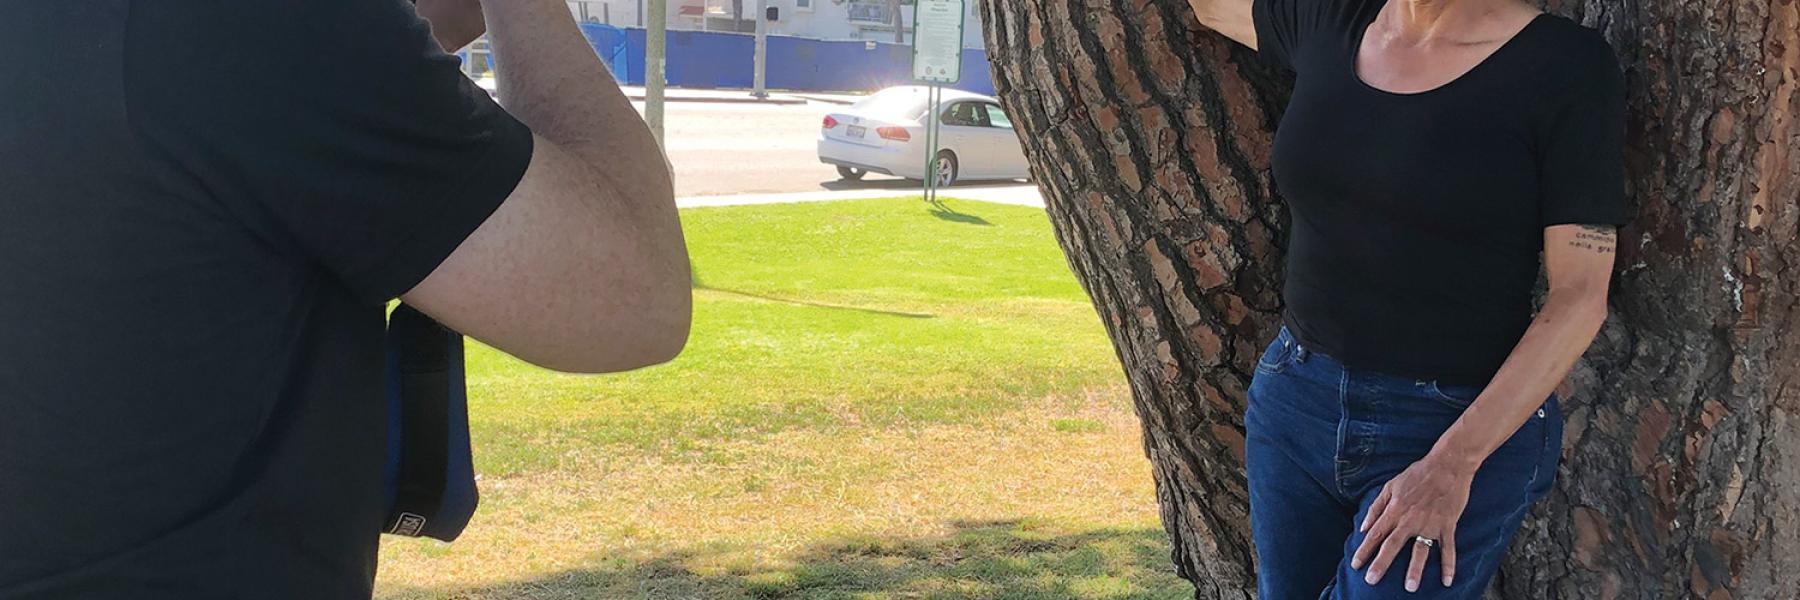 Transgender actor Alexandra Billings leaning against a tree while posing for a photographer